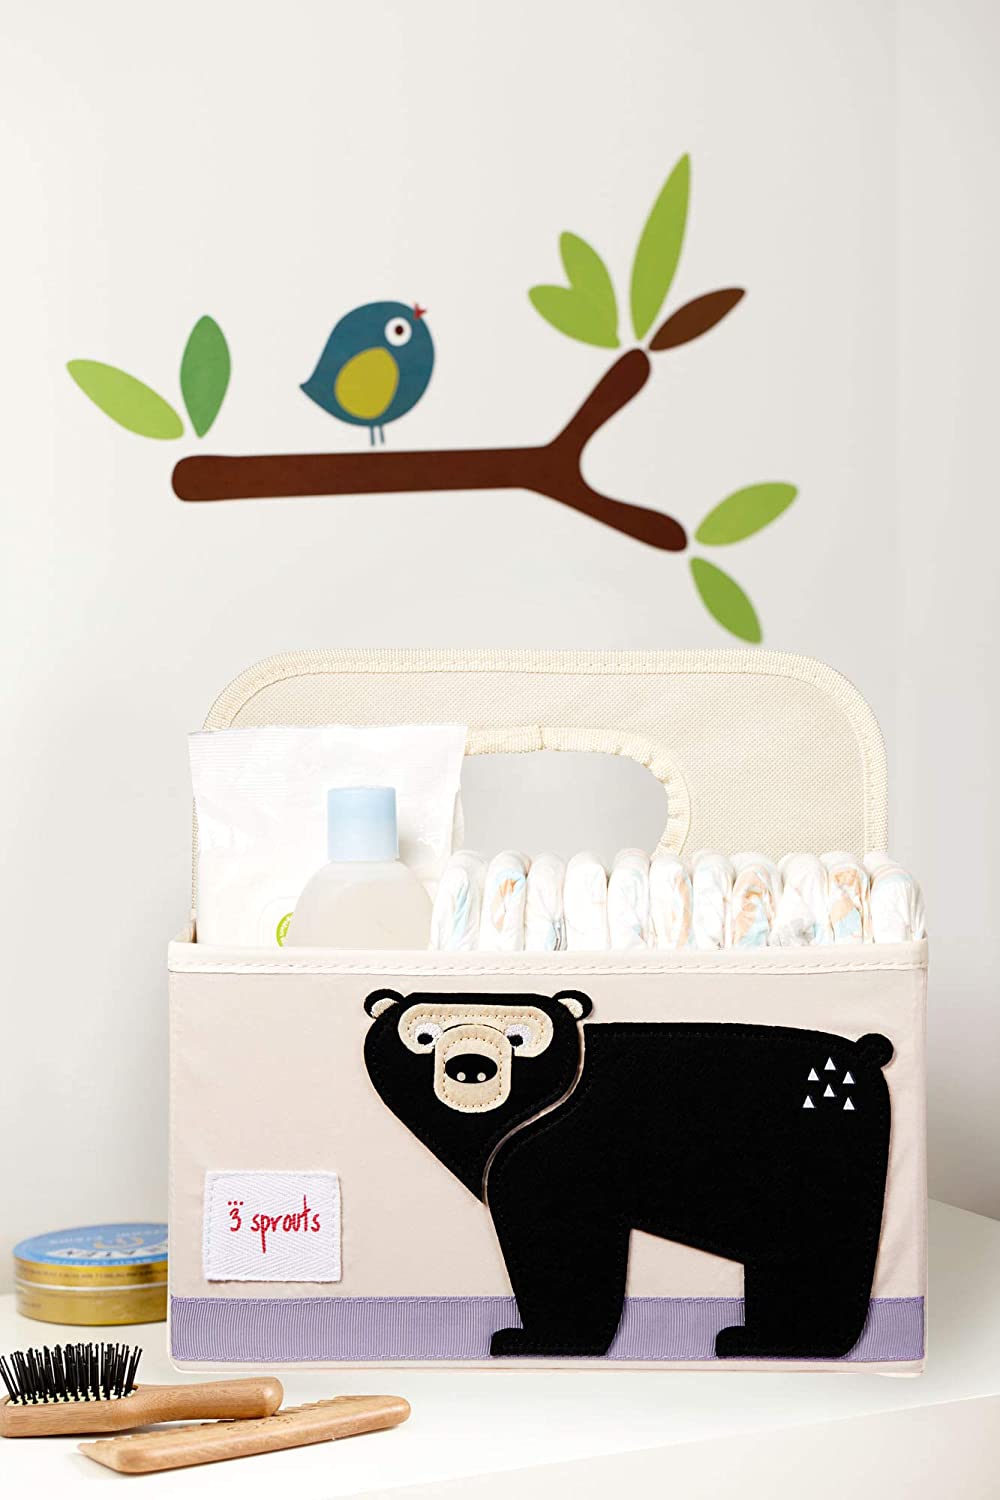 3 SproutsBaby Nappy Caddy - Organiser Basket for NurseryColour Name: Whalefurniture storageEarthlets